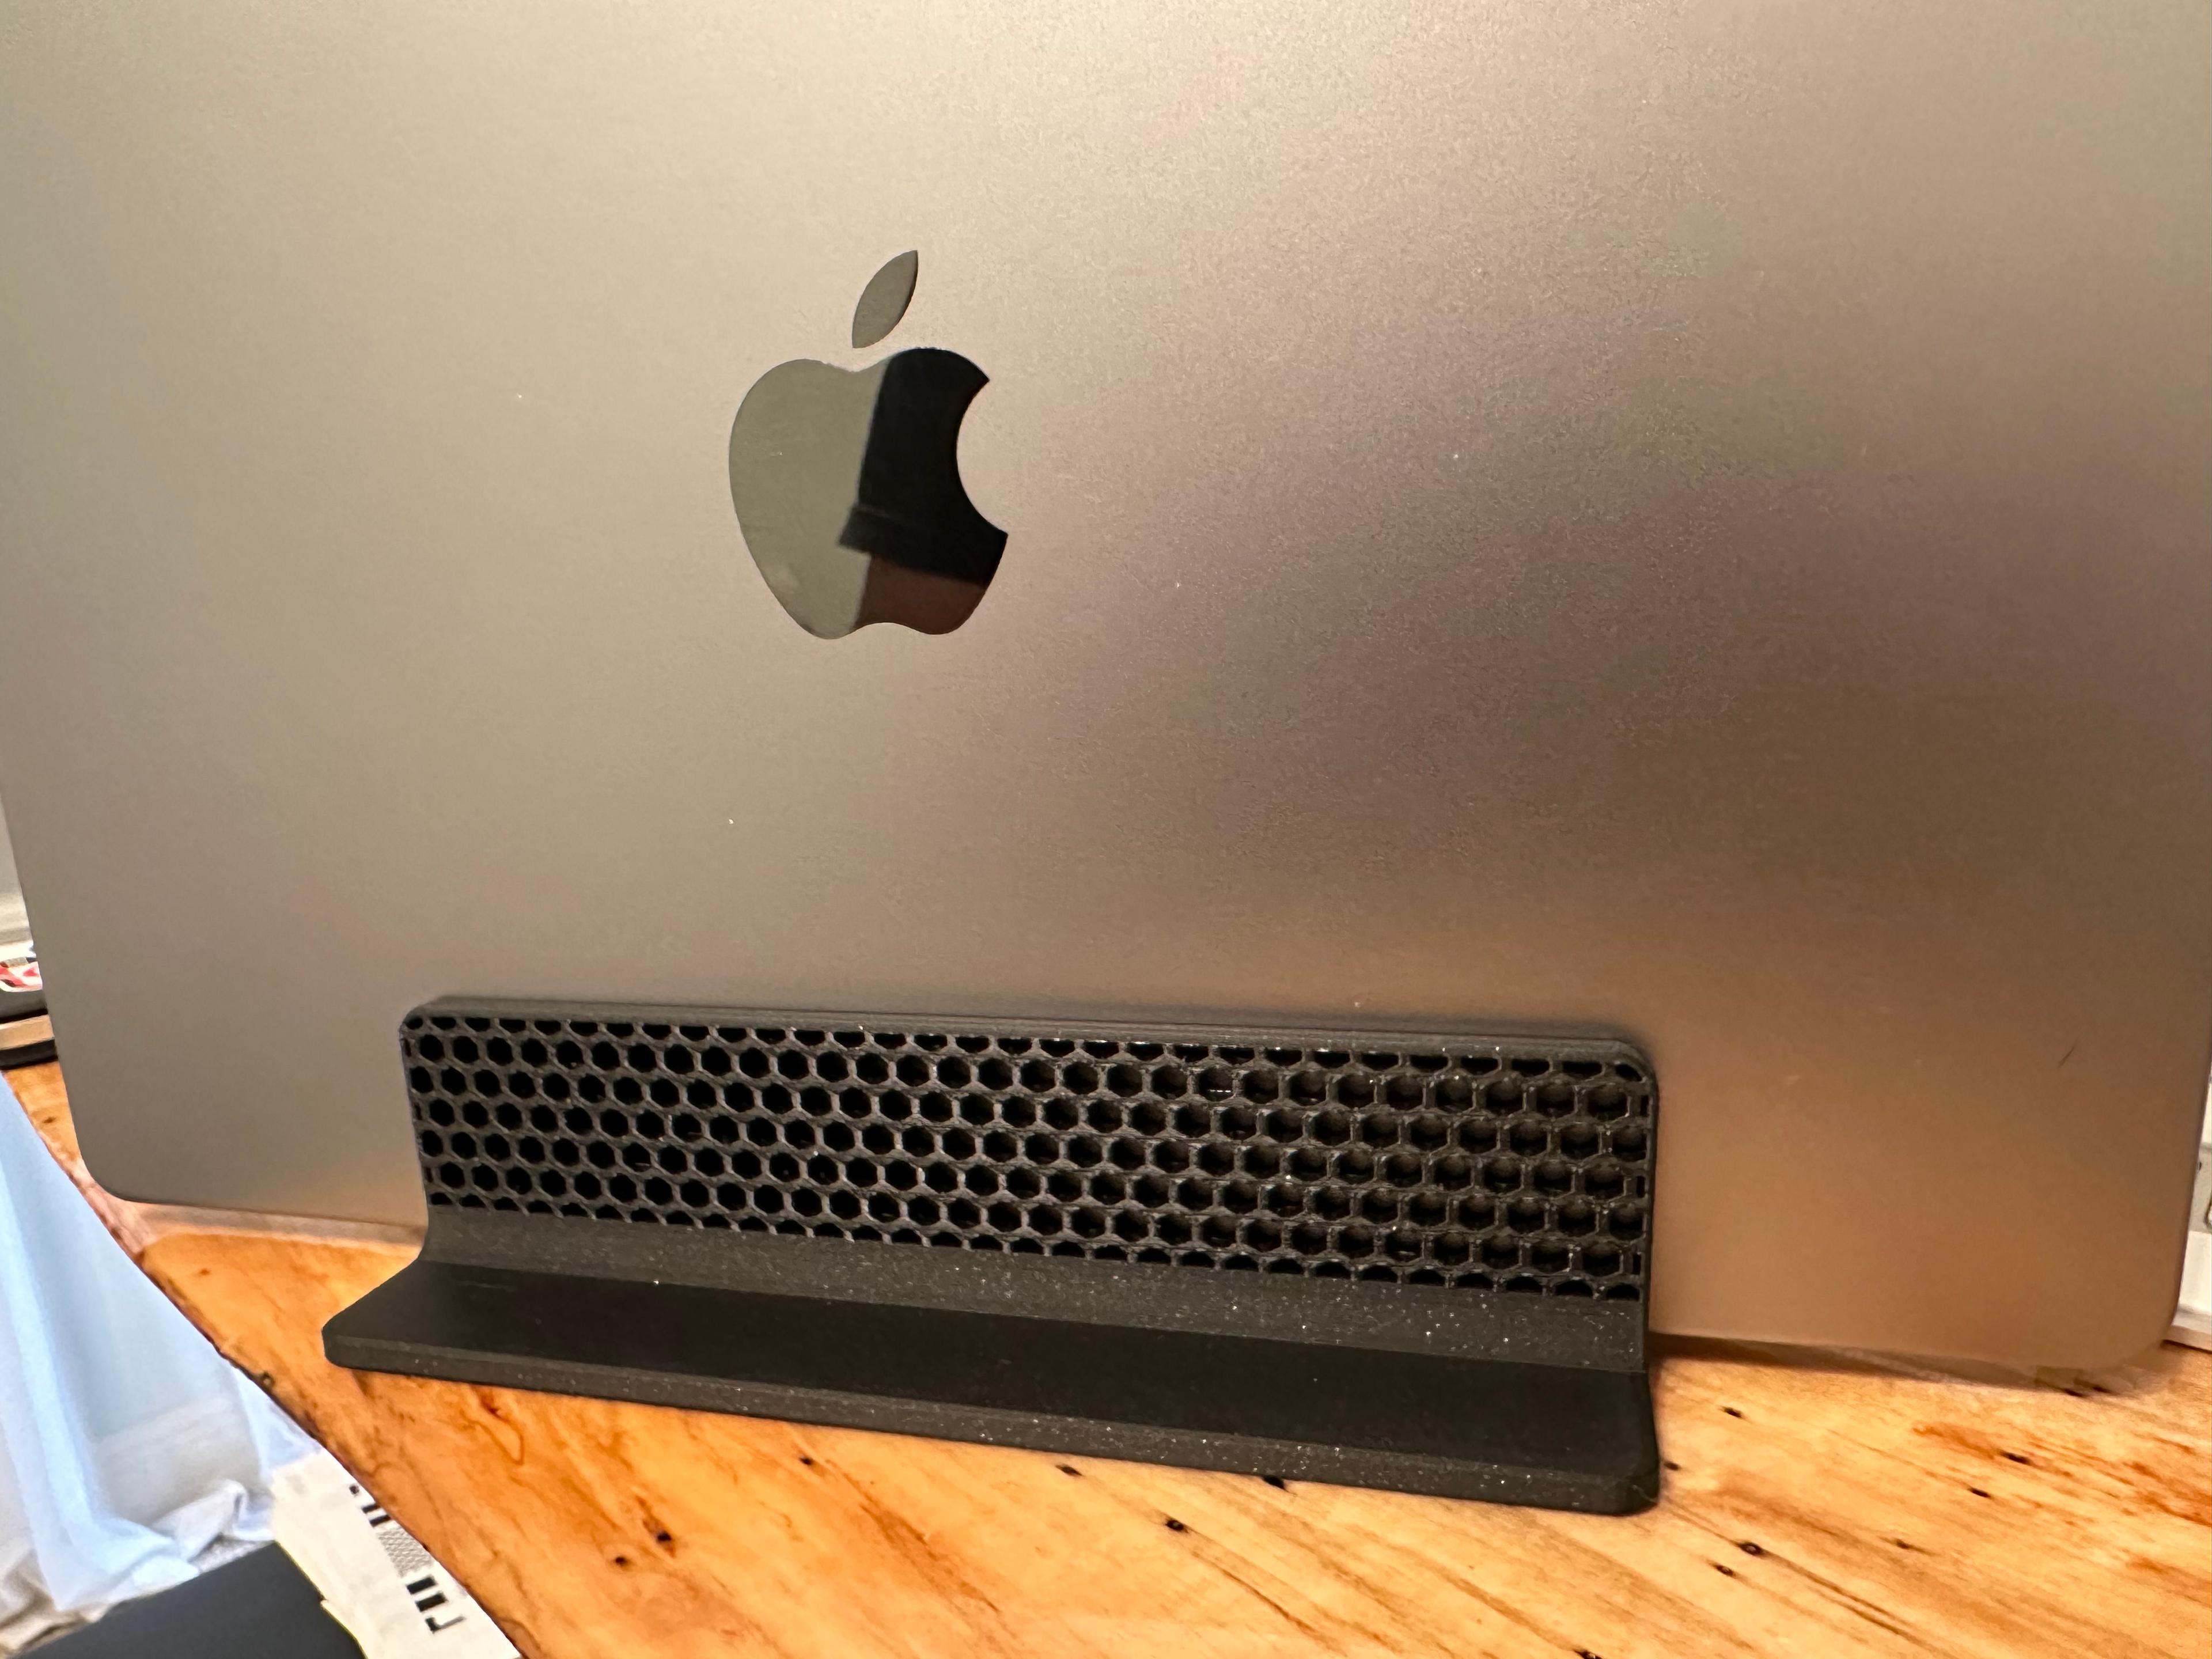 Vertical Stand for M1/M2 Macbook Pro 3d model